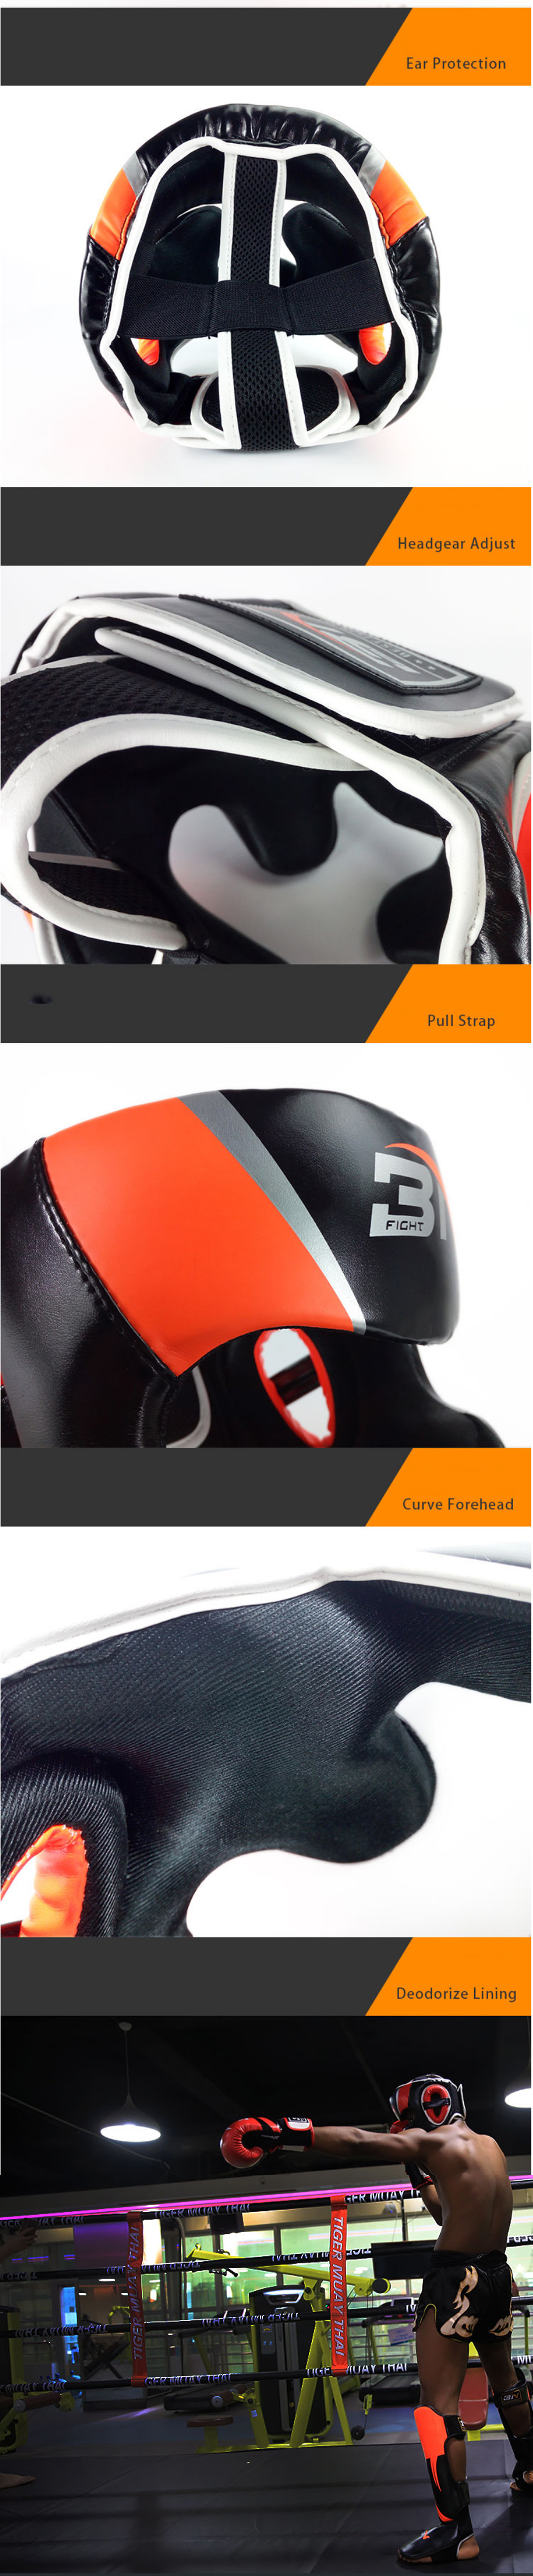 BN-FIGHT-Full-Covered-Boxing-Helmet-Muay-Thai-PU-Leather-Training-Sparring-Boxing-Headgear-Gym-Equip-1795853-3